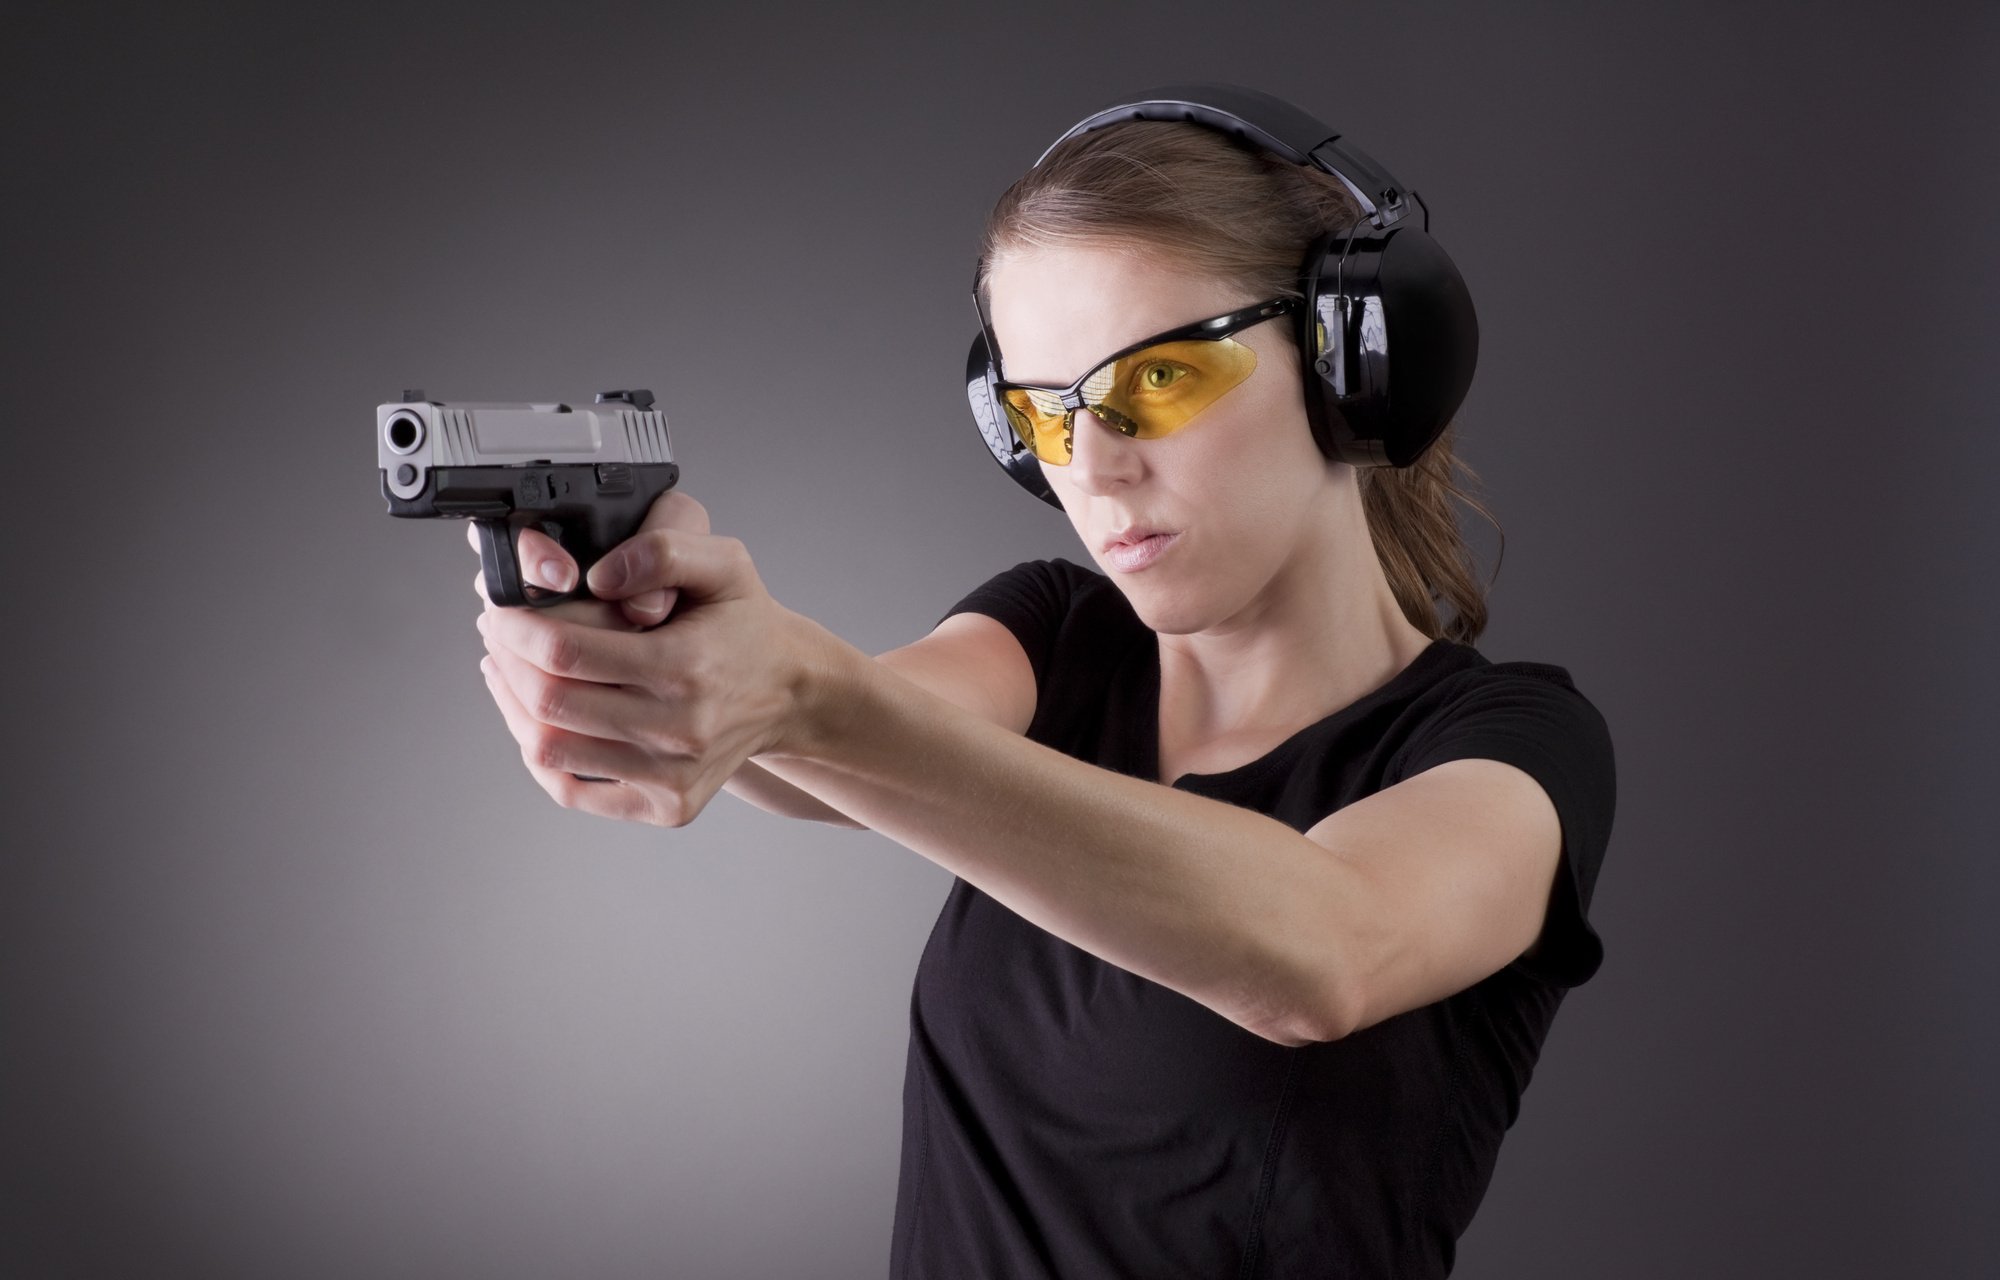 When it comes to shooting a gun, there are several things you need to understand. This guide breaks down the best stance for shooting a pistol.